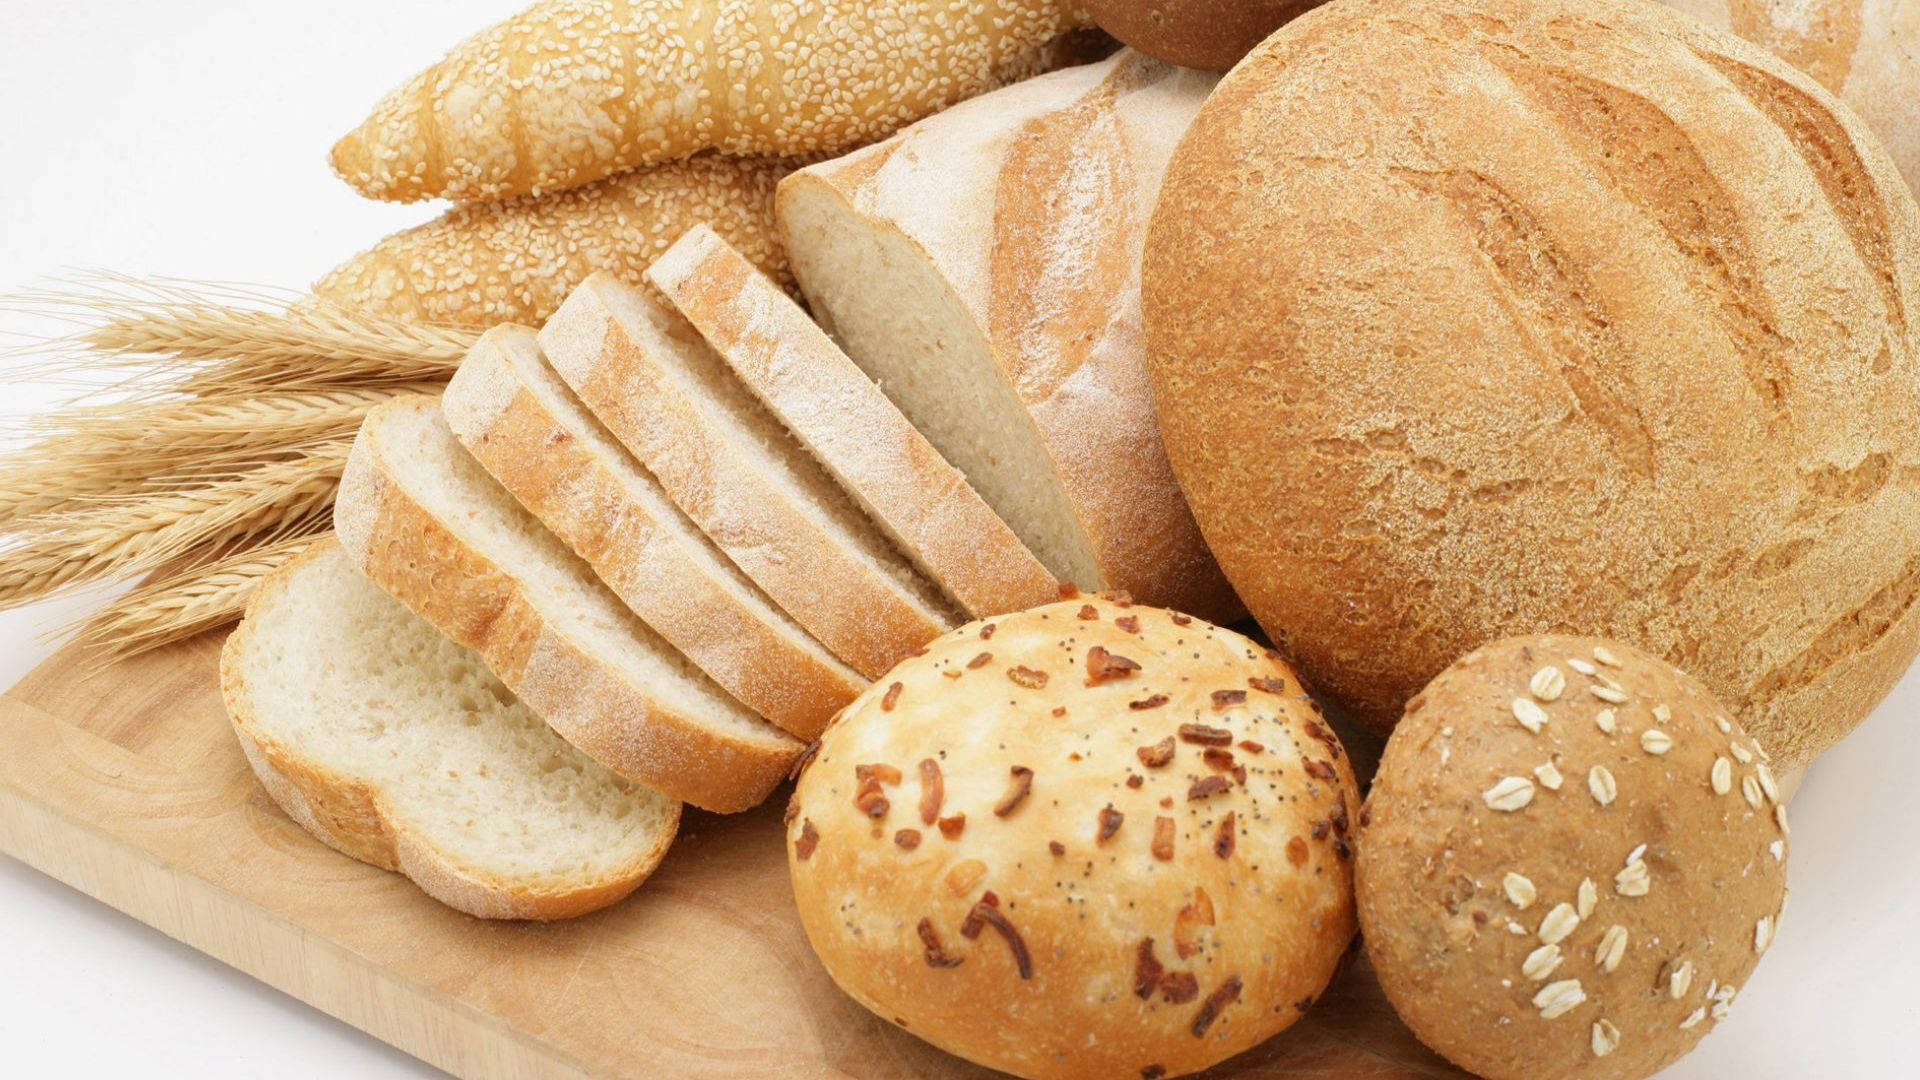 Breads On Tray Wallpaper